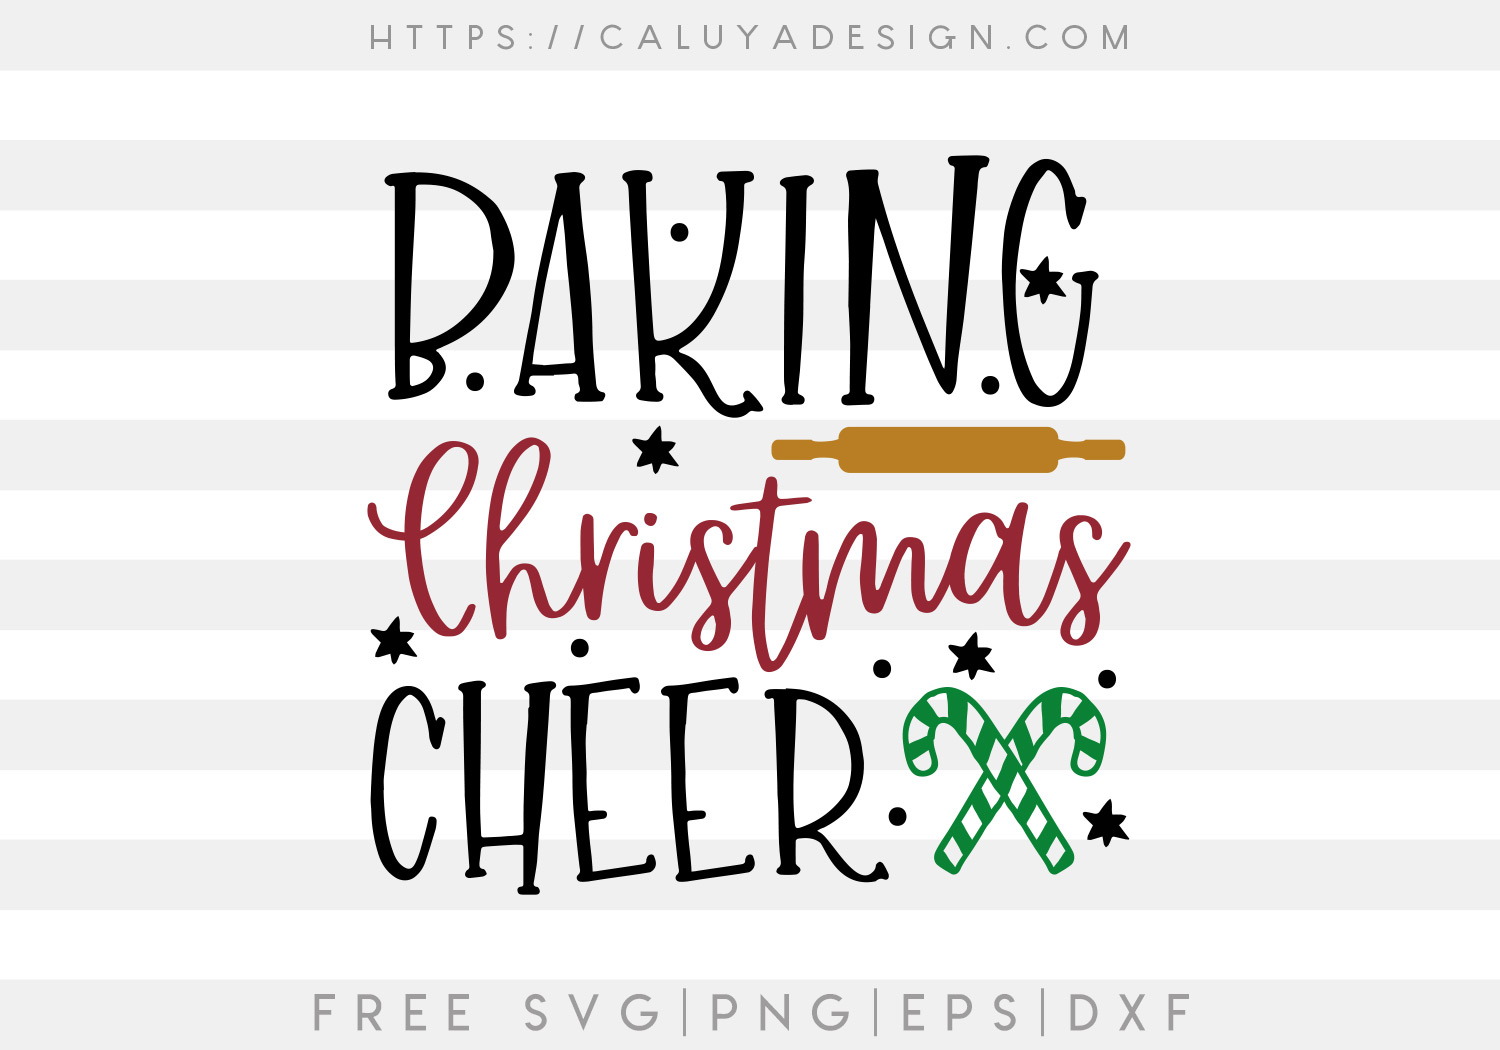 Baking Christmas Cheer SVG, PNG, EPS & DXF